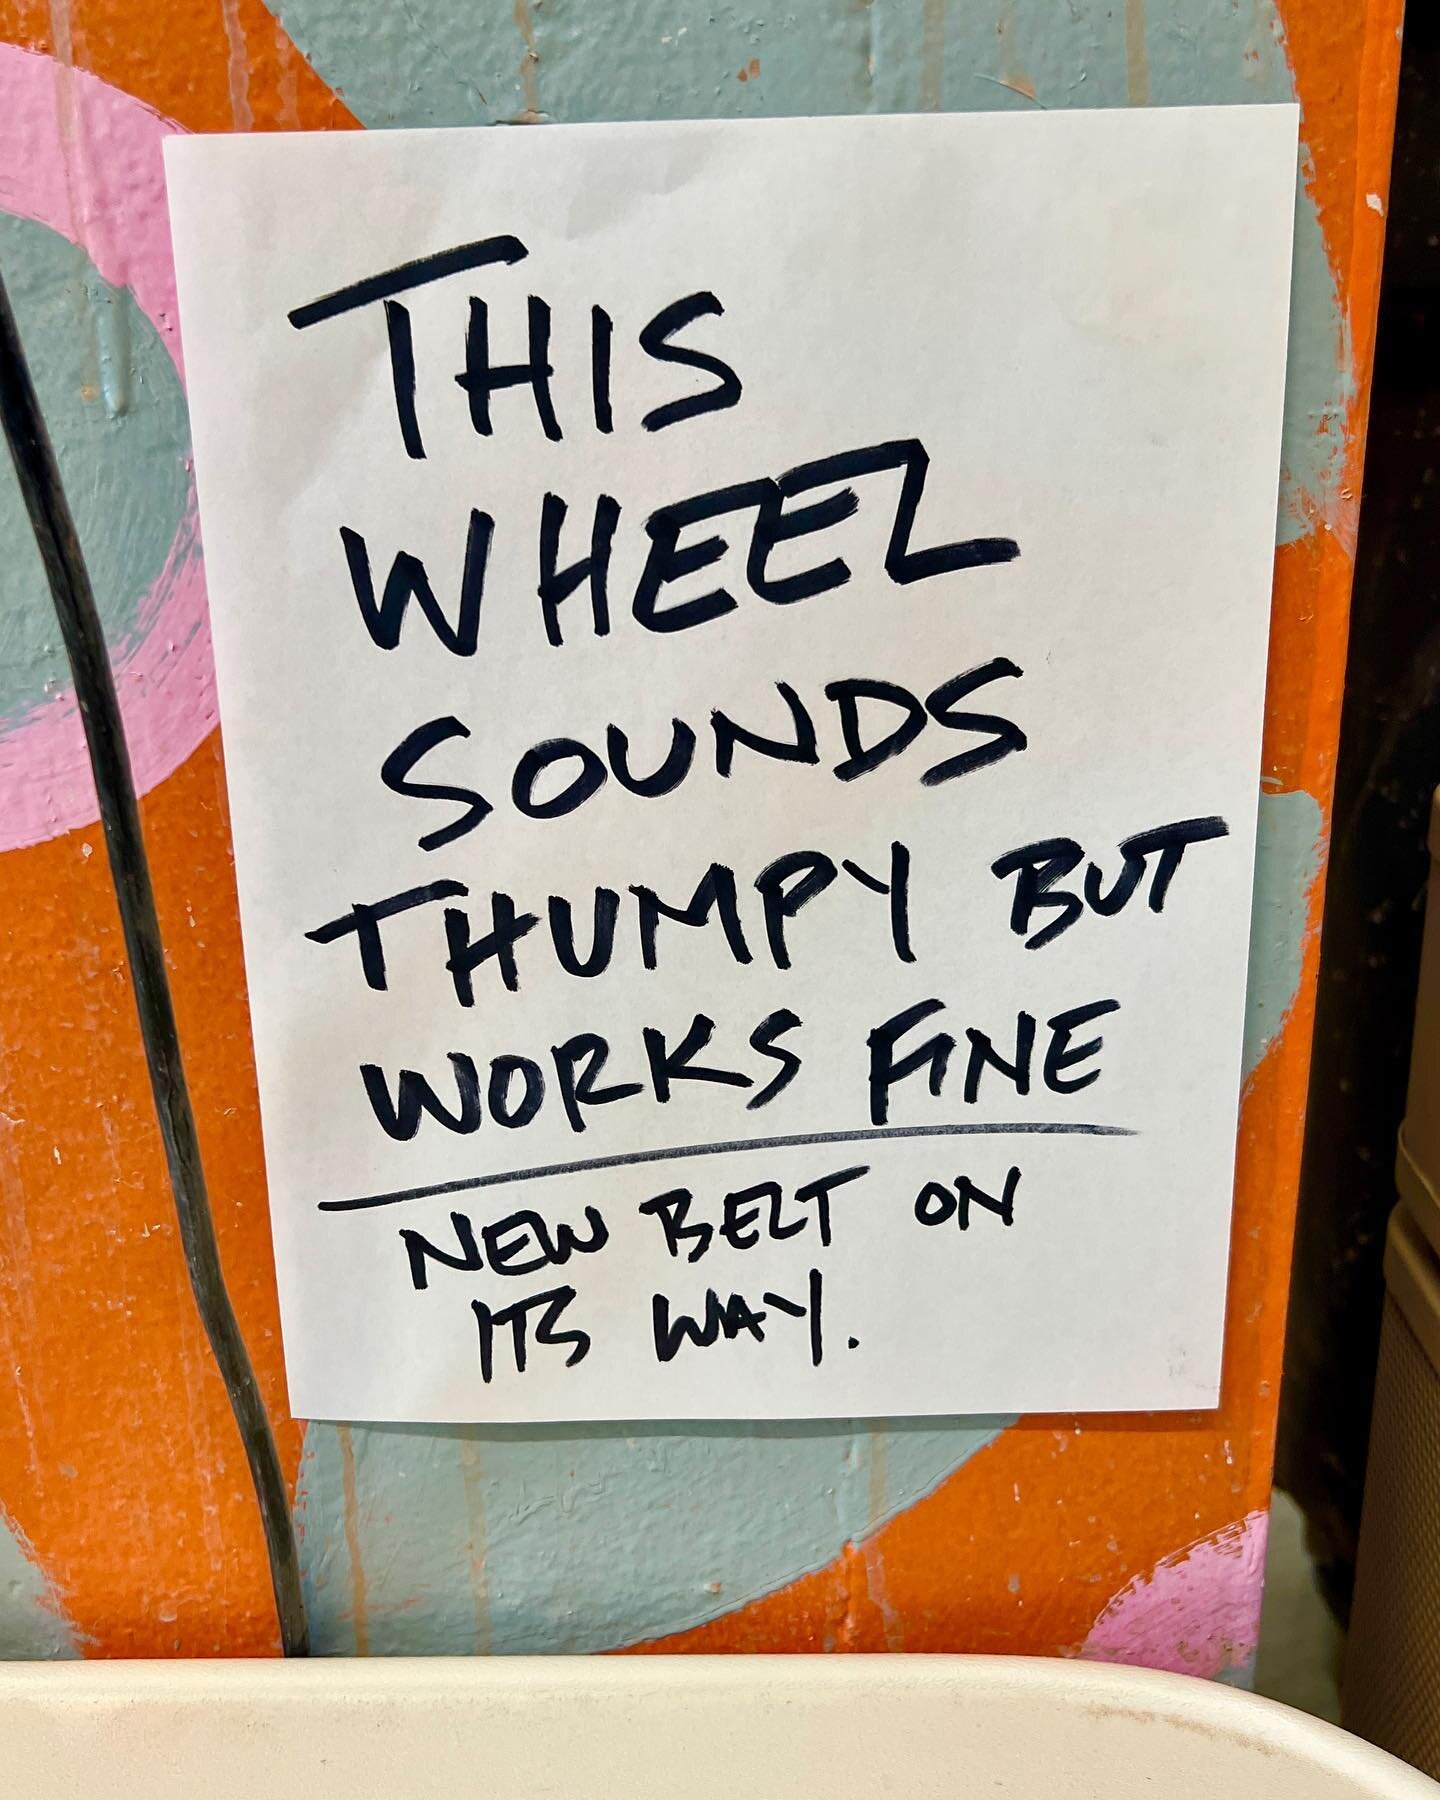 I first read this as &ldquo;this wheel sounds Trumpy, but works fine.&rdquo; It&rsquo;s still cracking me up.